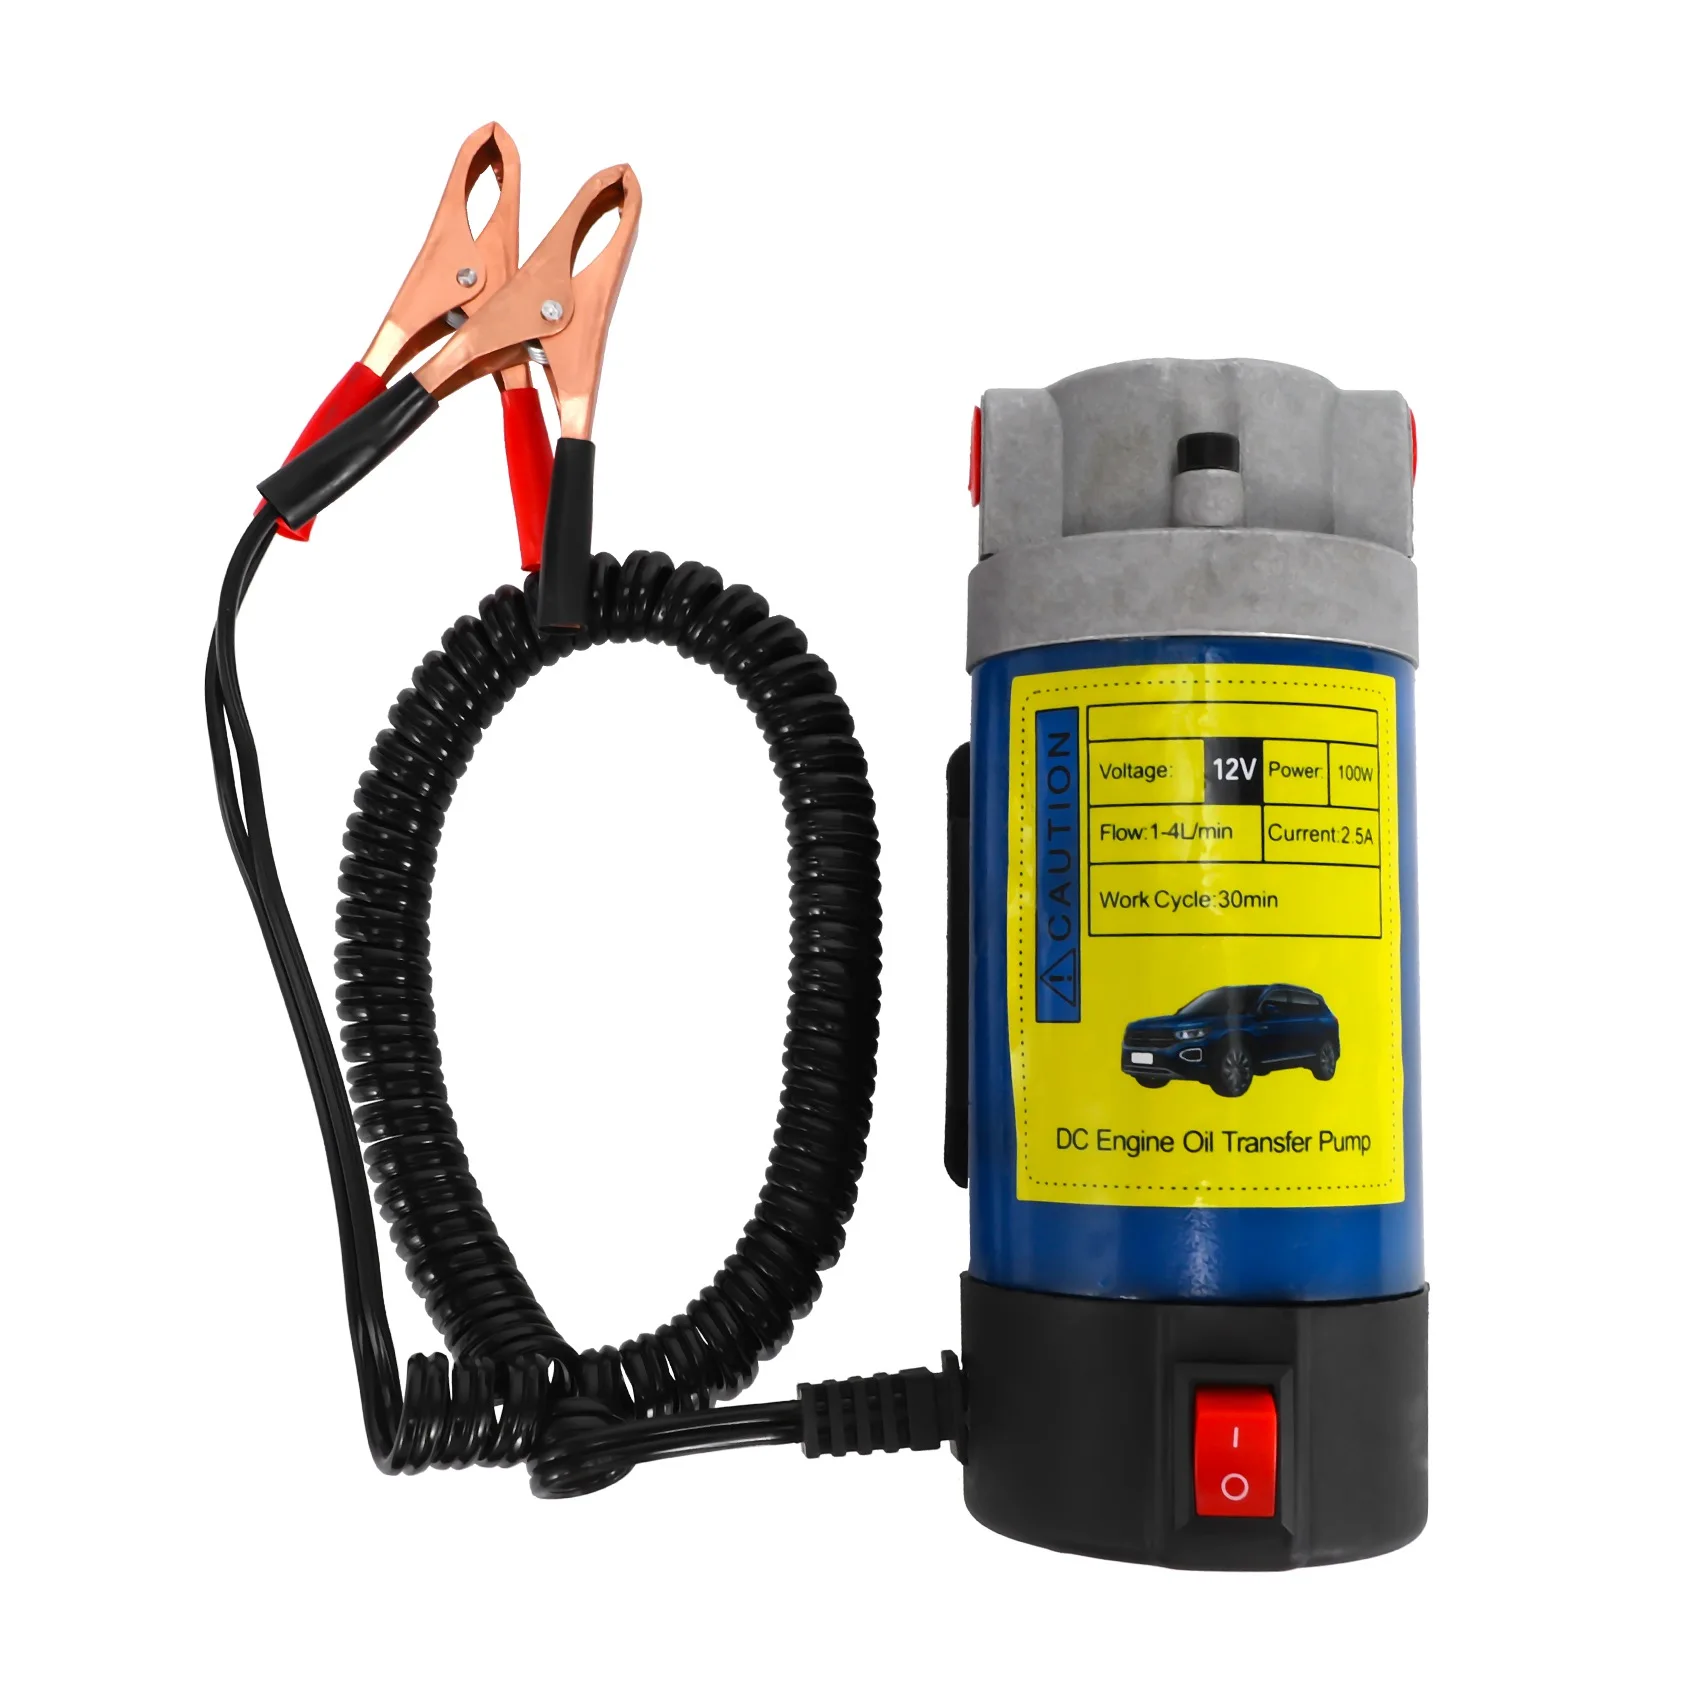 

12V Electric Scavenge Suction Transfer Change Pump Motor Oil Extractor Pump 100W 4L for Car